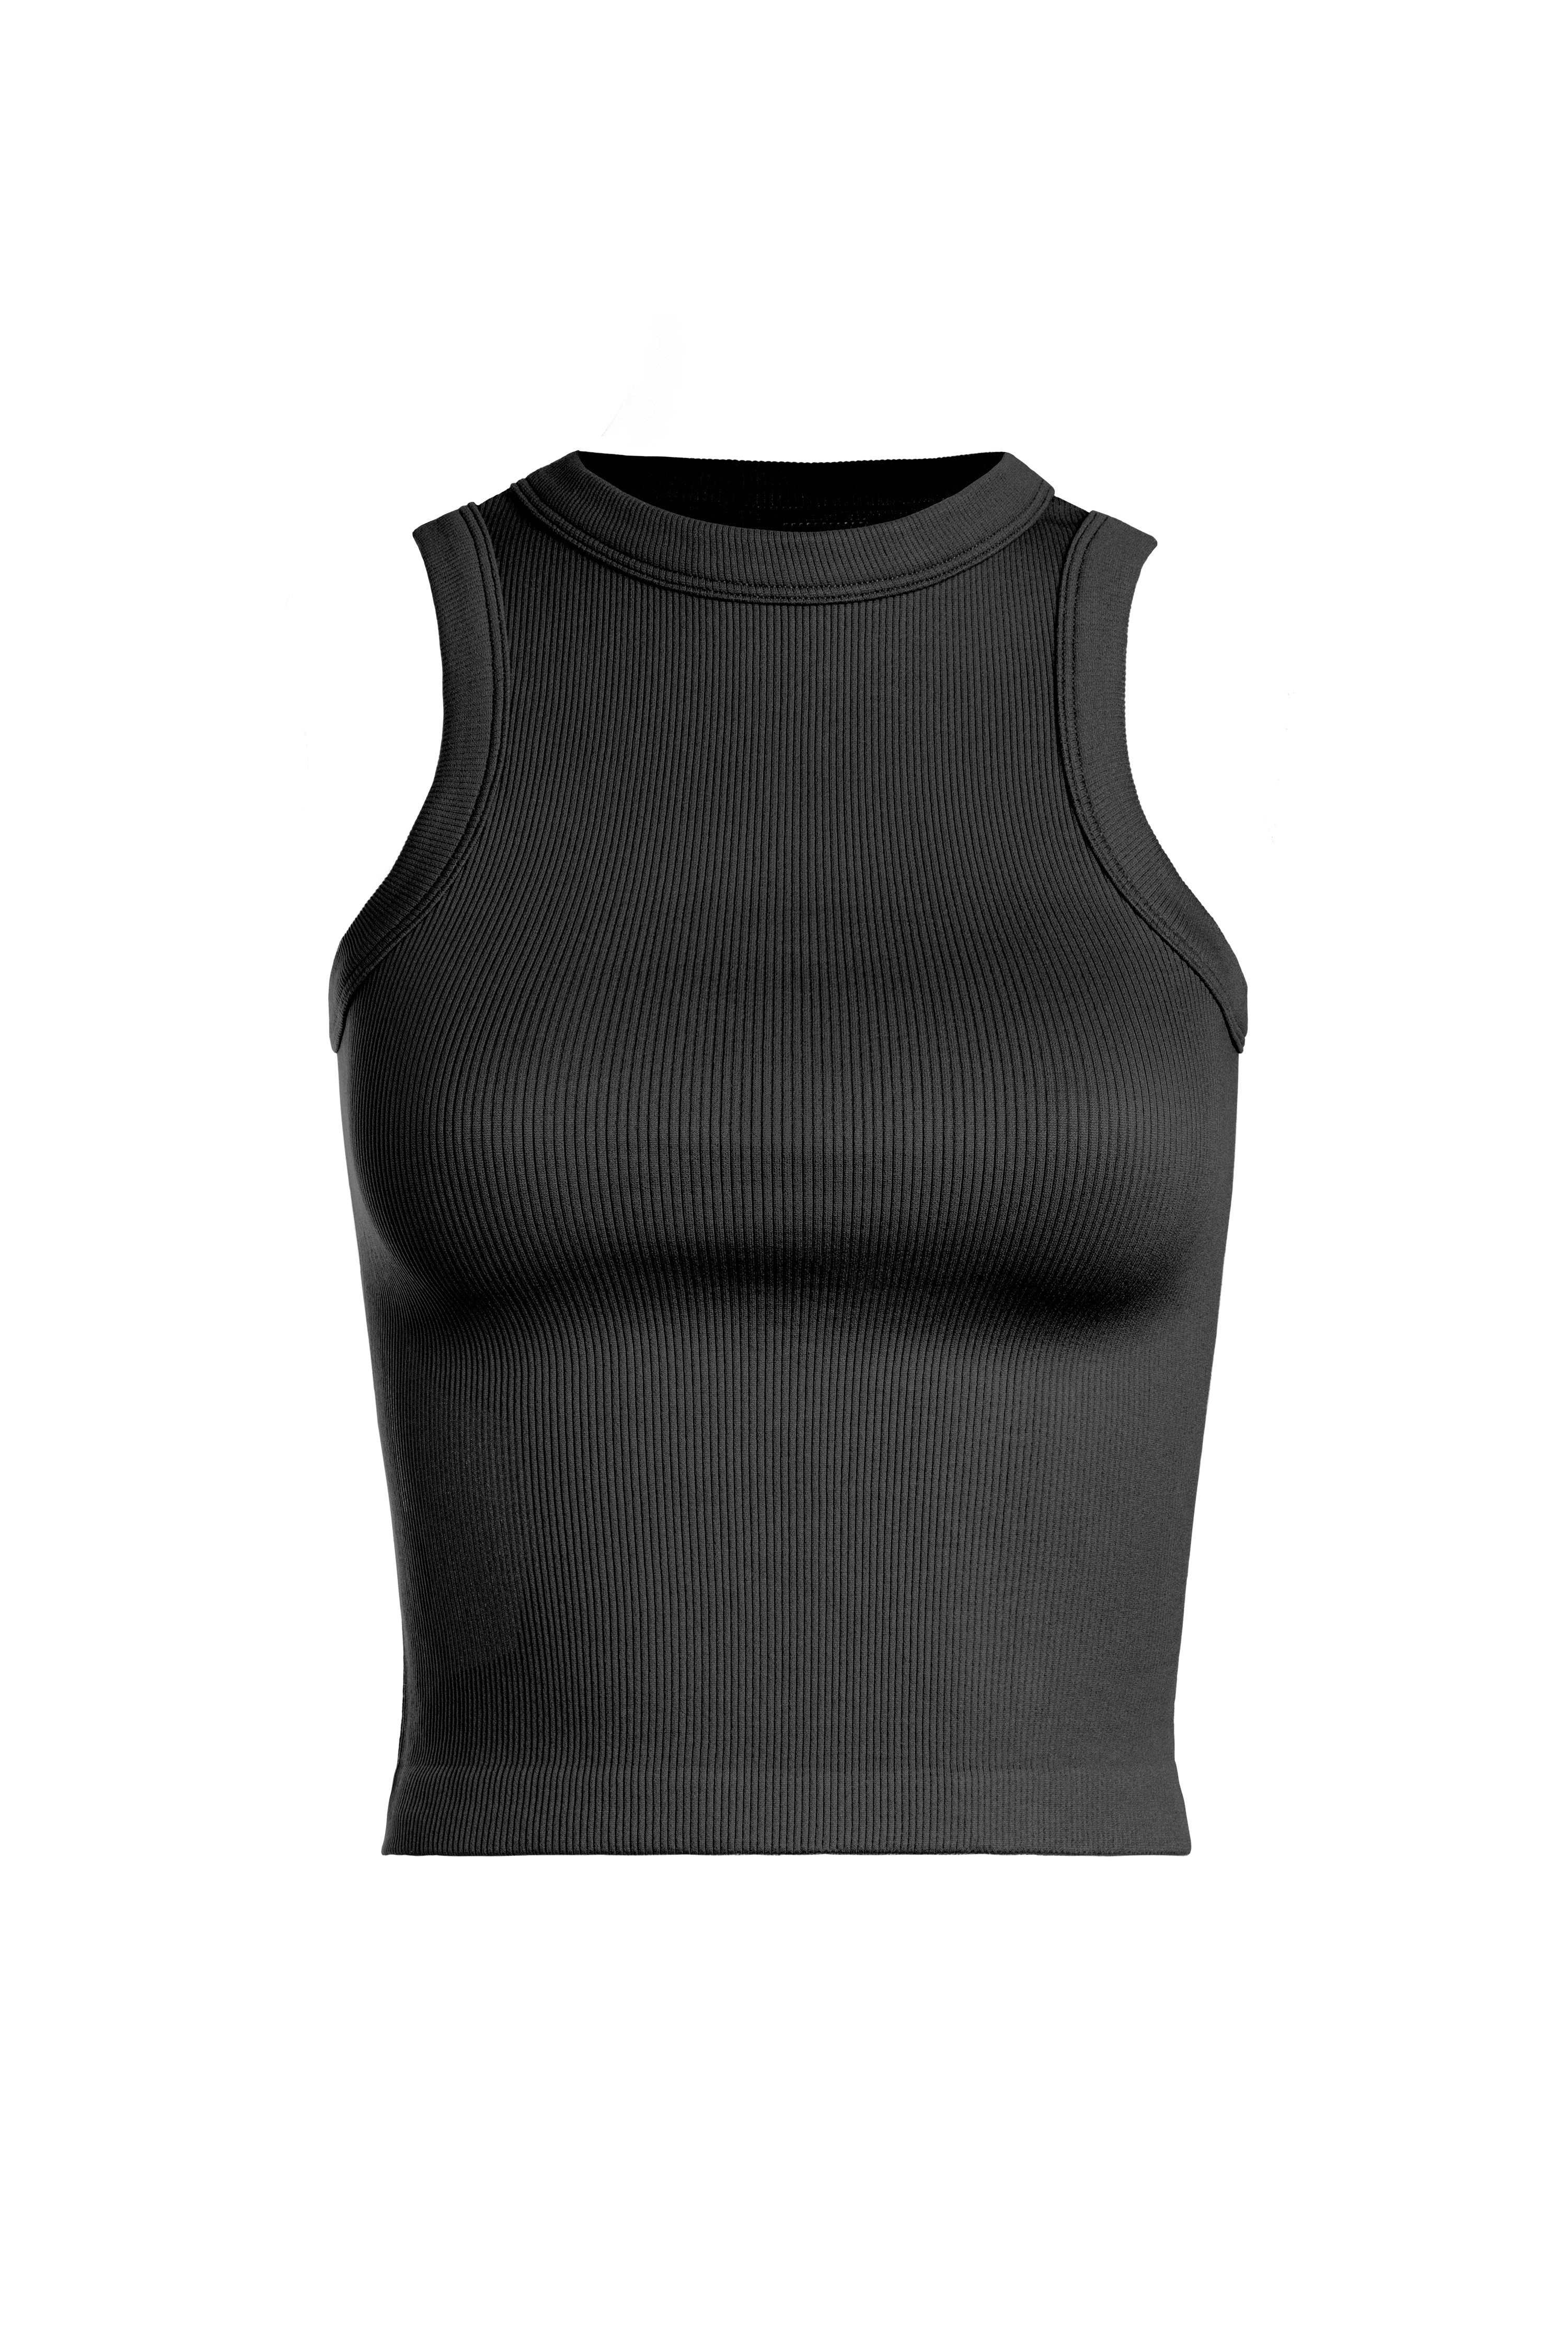 Black Ribbed Basic Tank | Collective Request 